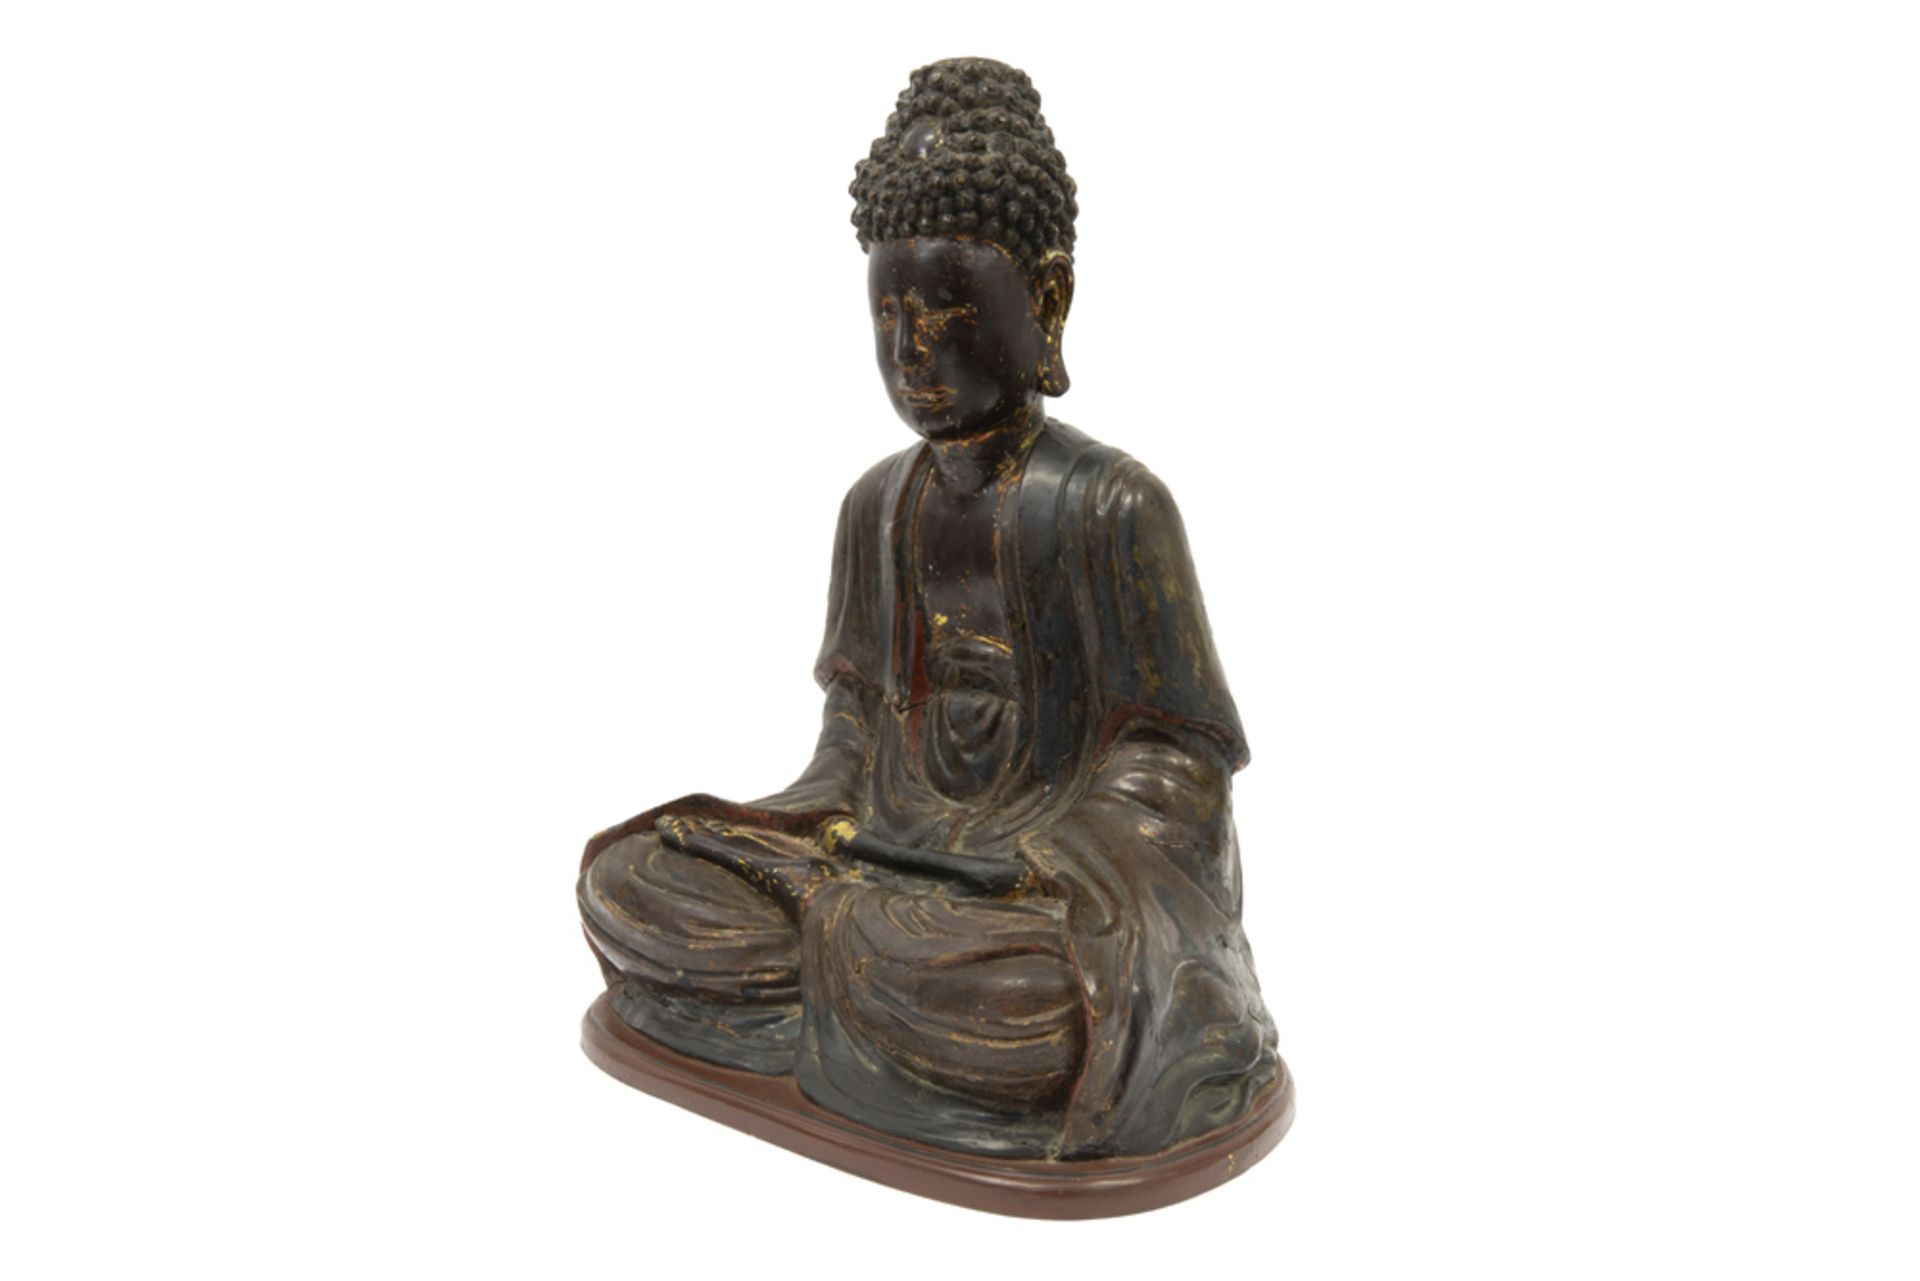 19th Cent. Vietnamese "Buddha" sculpture in lacquered teak wood with remains of gilding || VIETNAM - - Image 2 of 5